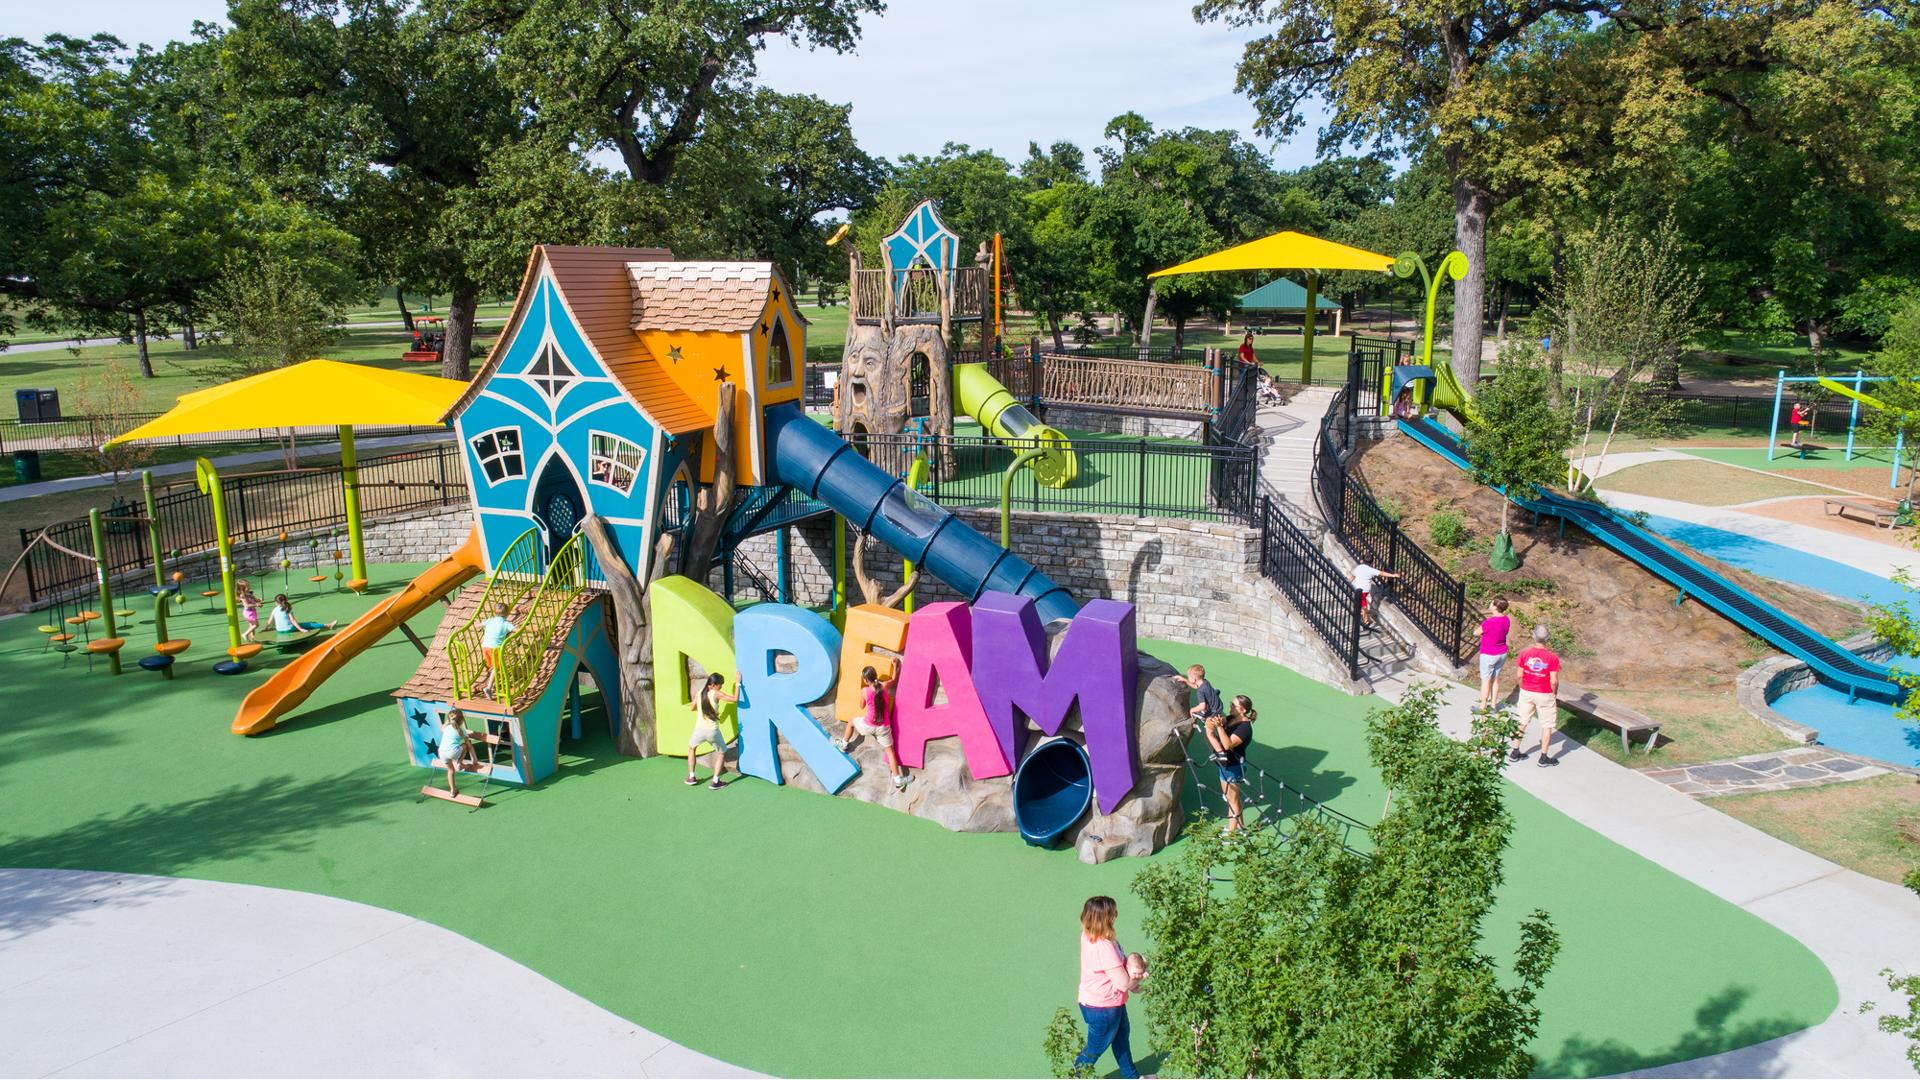 Sprawling inclusive playground; Frank Kent's Dream Park in Fort Worth, TX offers an  inclusive playground with a concrete-sculpted DREAM climber centerpiece. A hot air balloon-themed play space for ages 2 to 5. As well as a Double ZipKrooz®, We-saw™, playground swings, and net climbers.